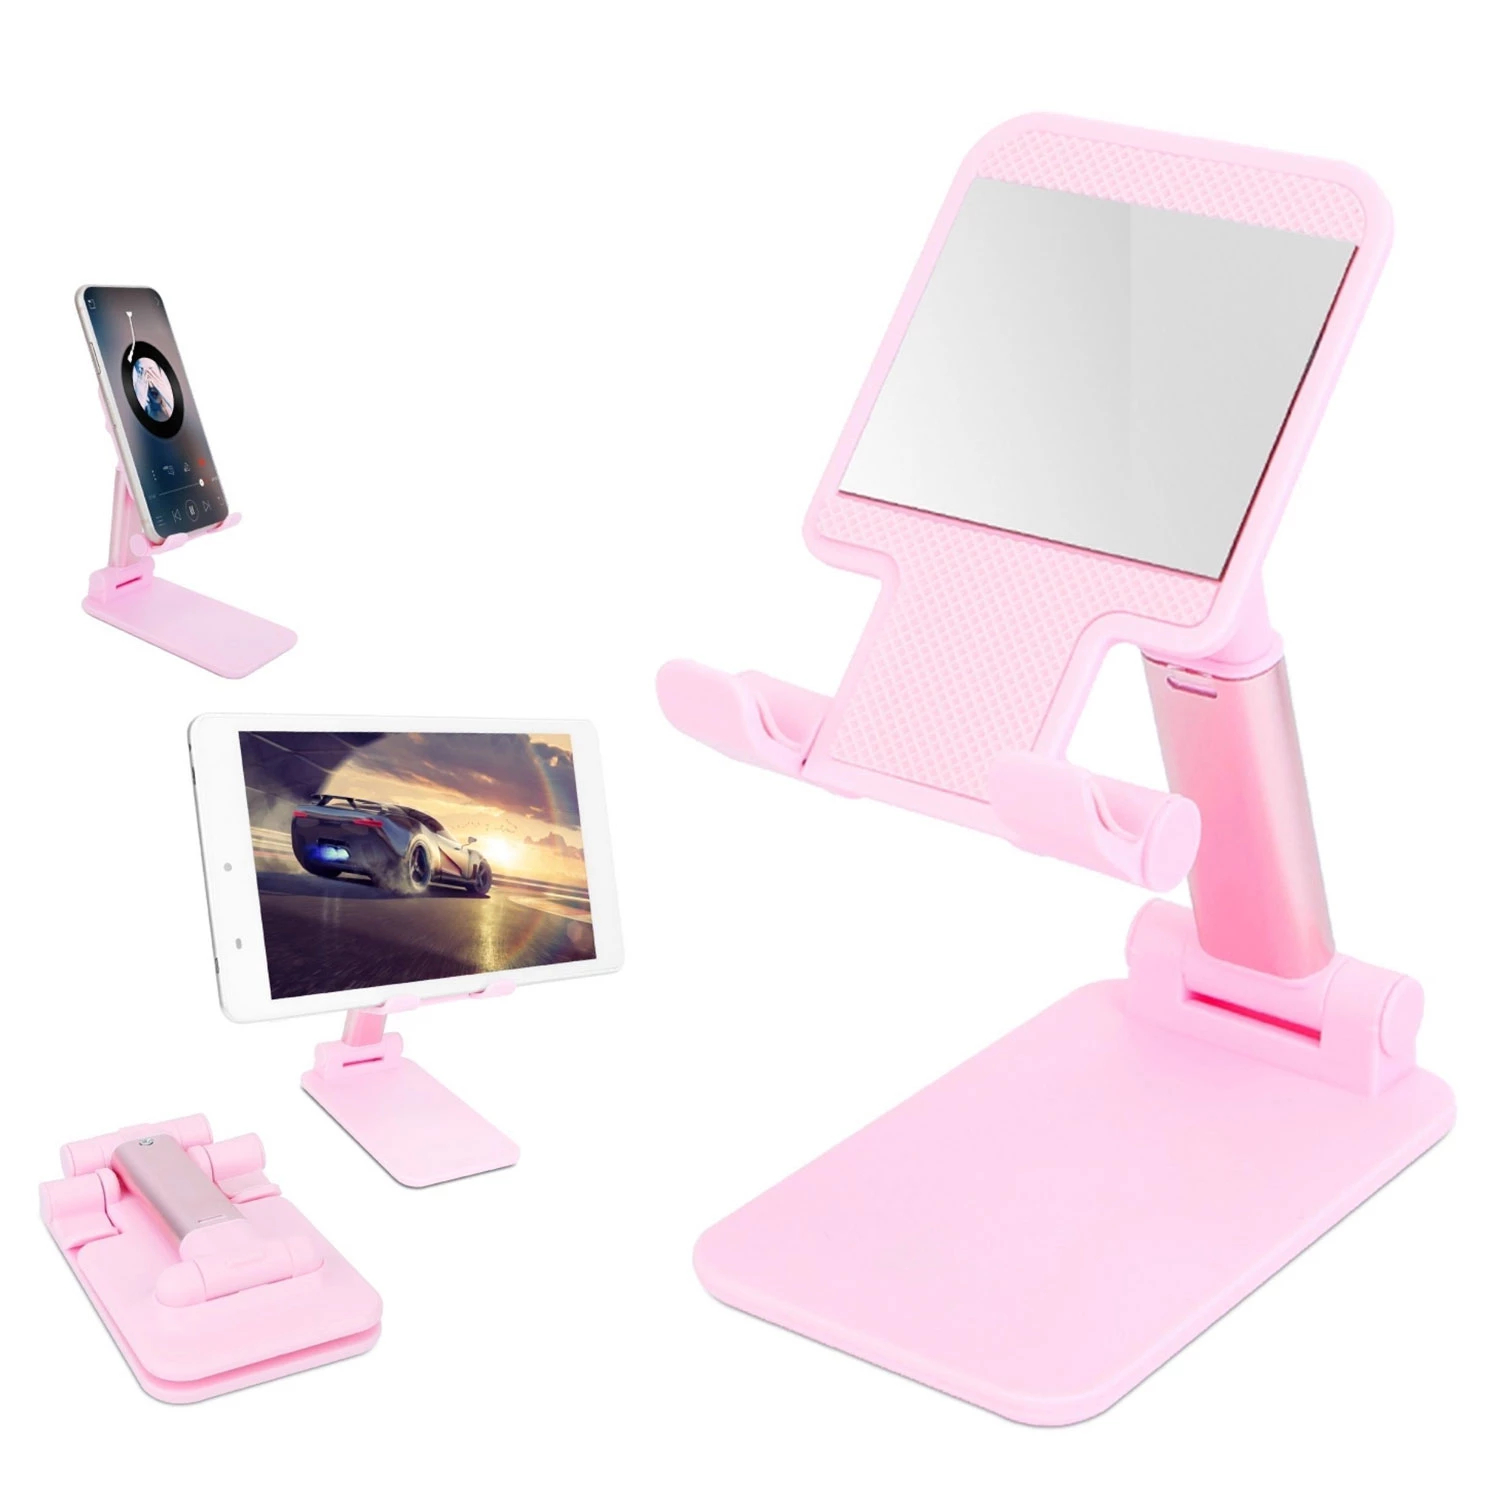 Foldable Phone Stand - Adjustable Angle And Height - Fits 4-12.9in Device - Tablet Holder Cradle Doc